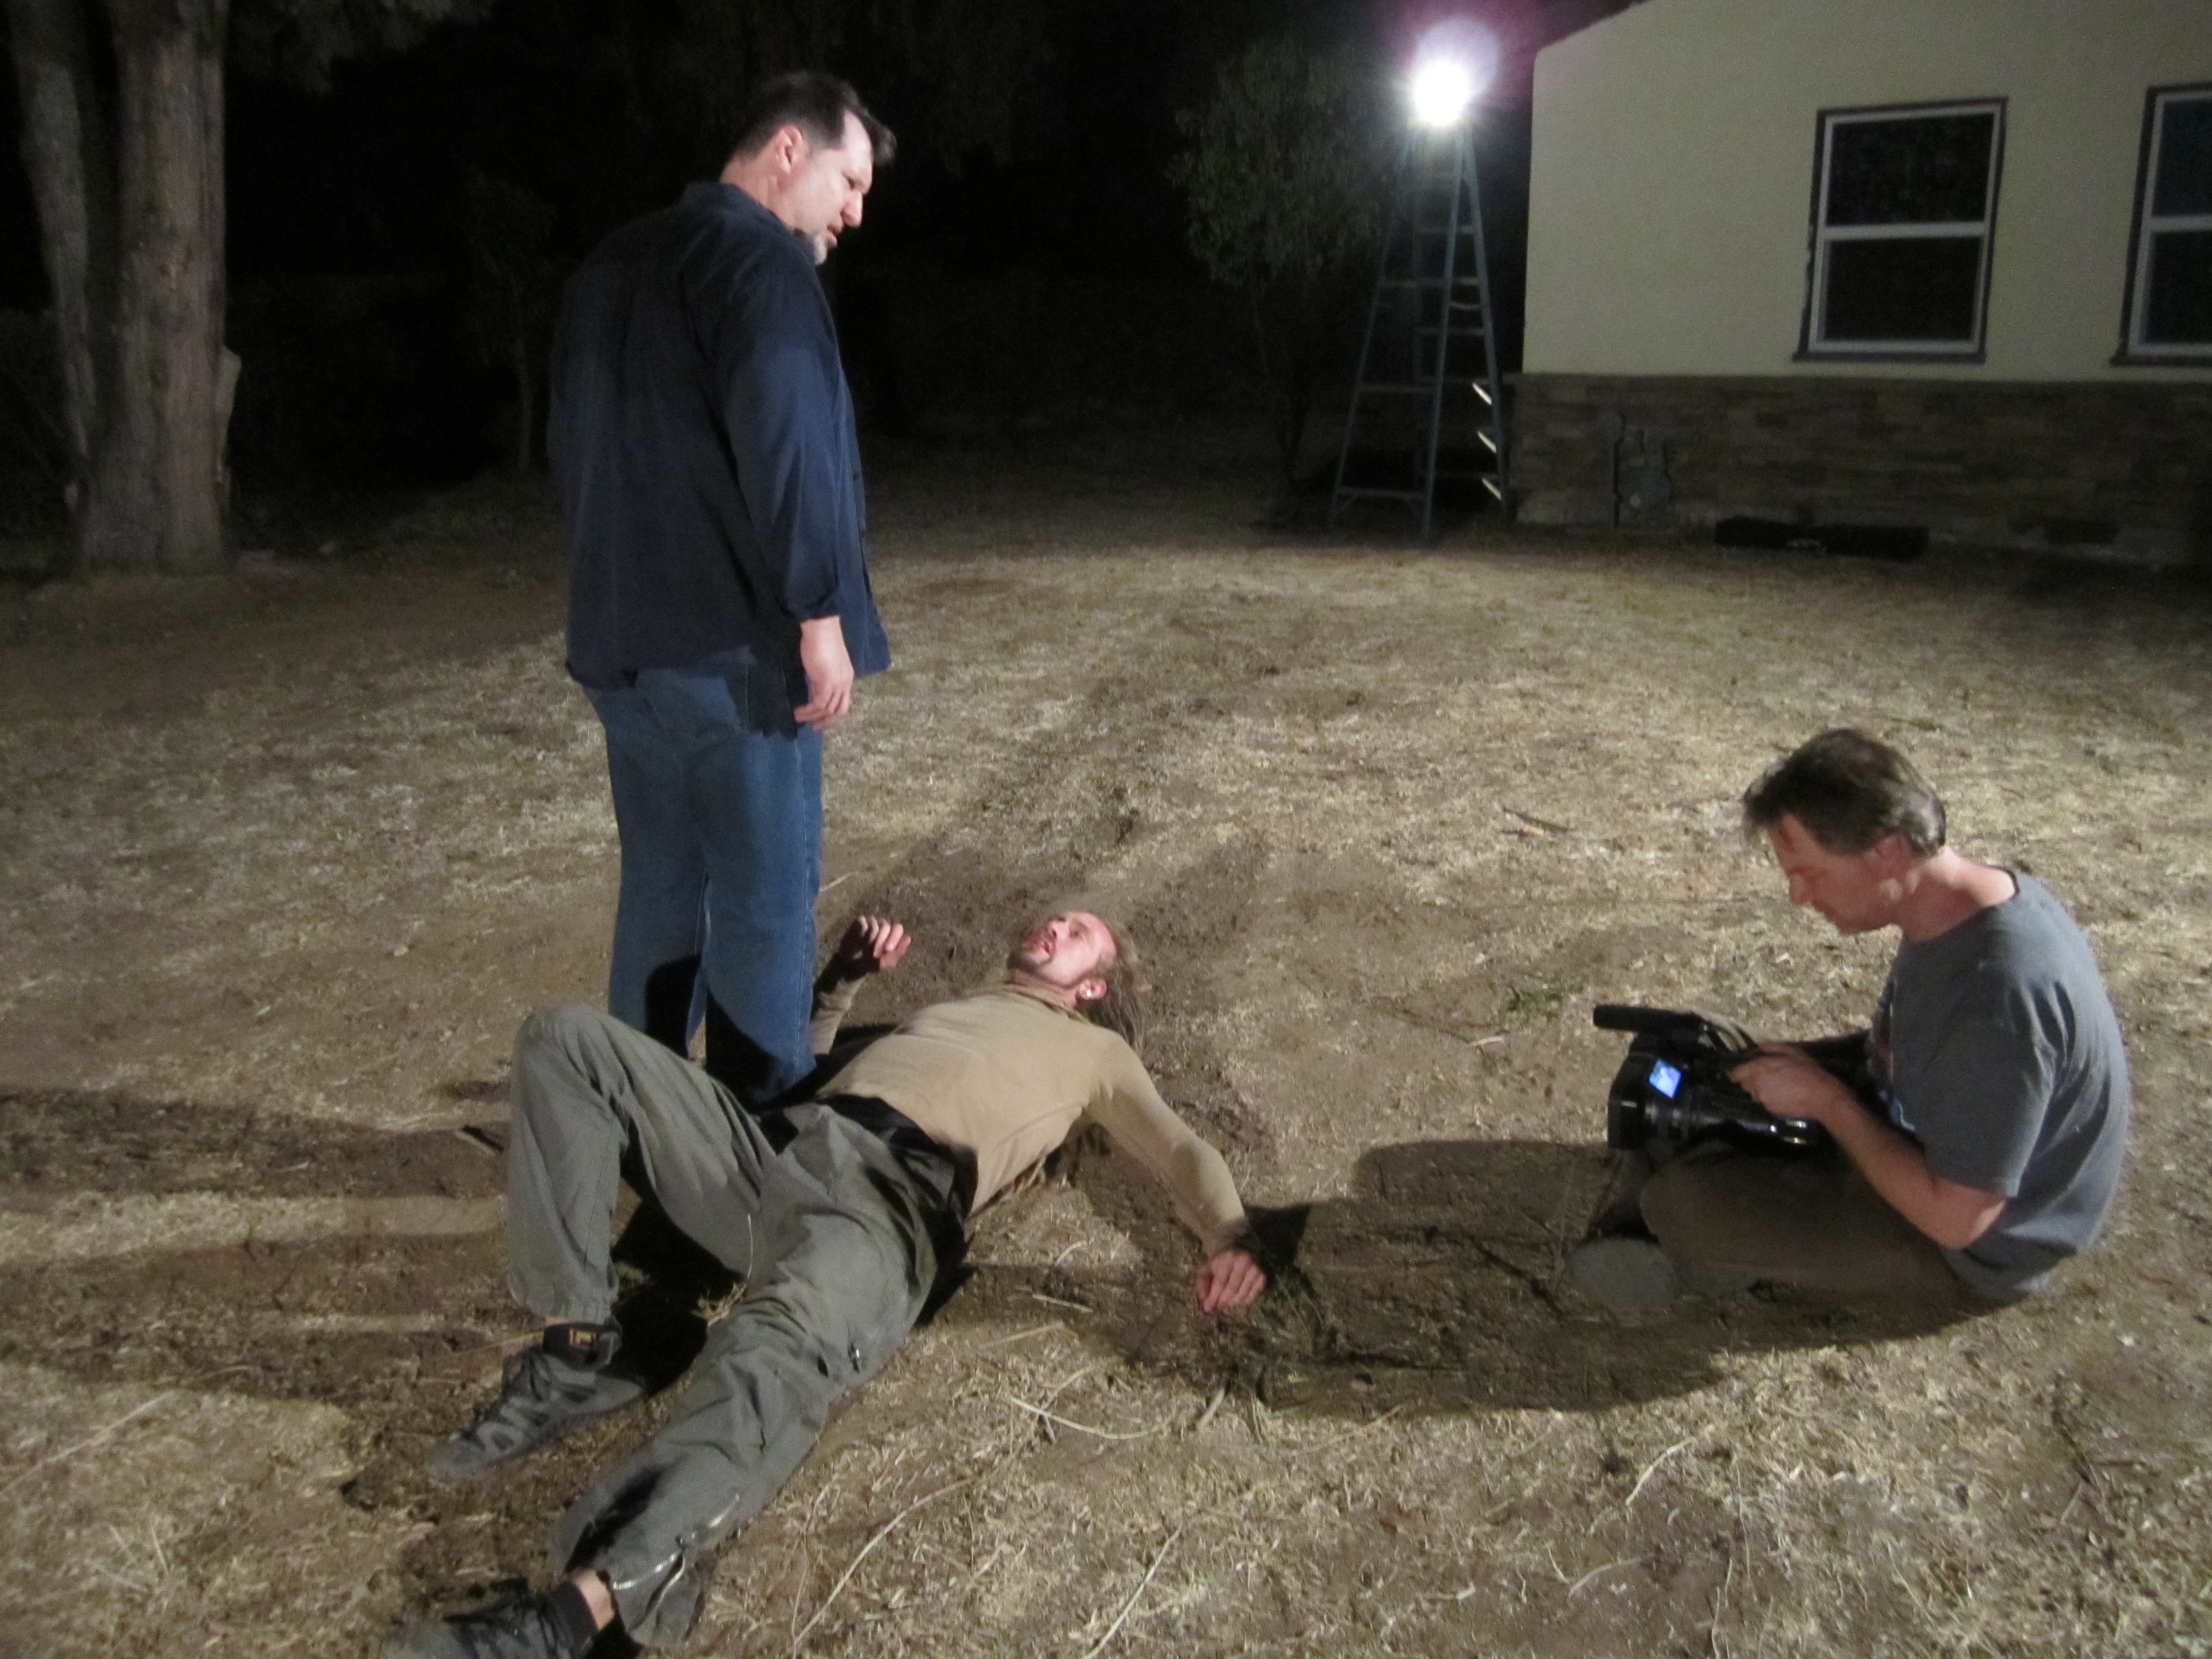 Actor/Director Brian Reed Garvin in the role of Archer Stone, prepares to stomp Actor Azmyth Kaminski as Cameraman Marc Elmer pulls focus for the feature film 